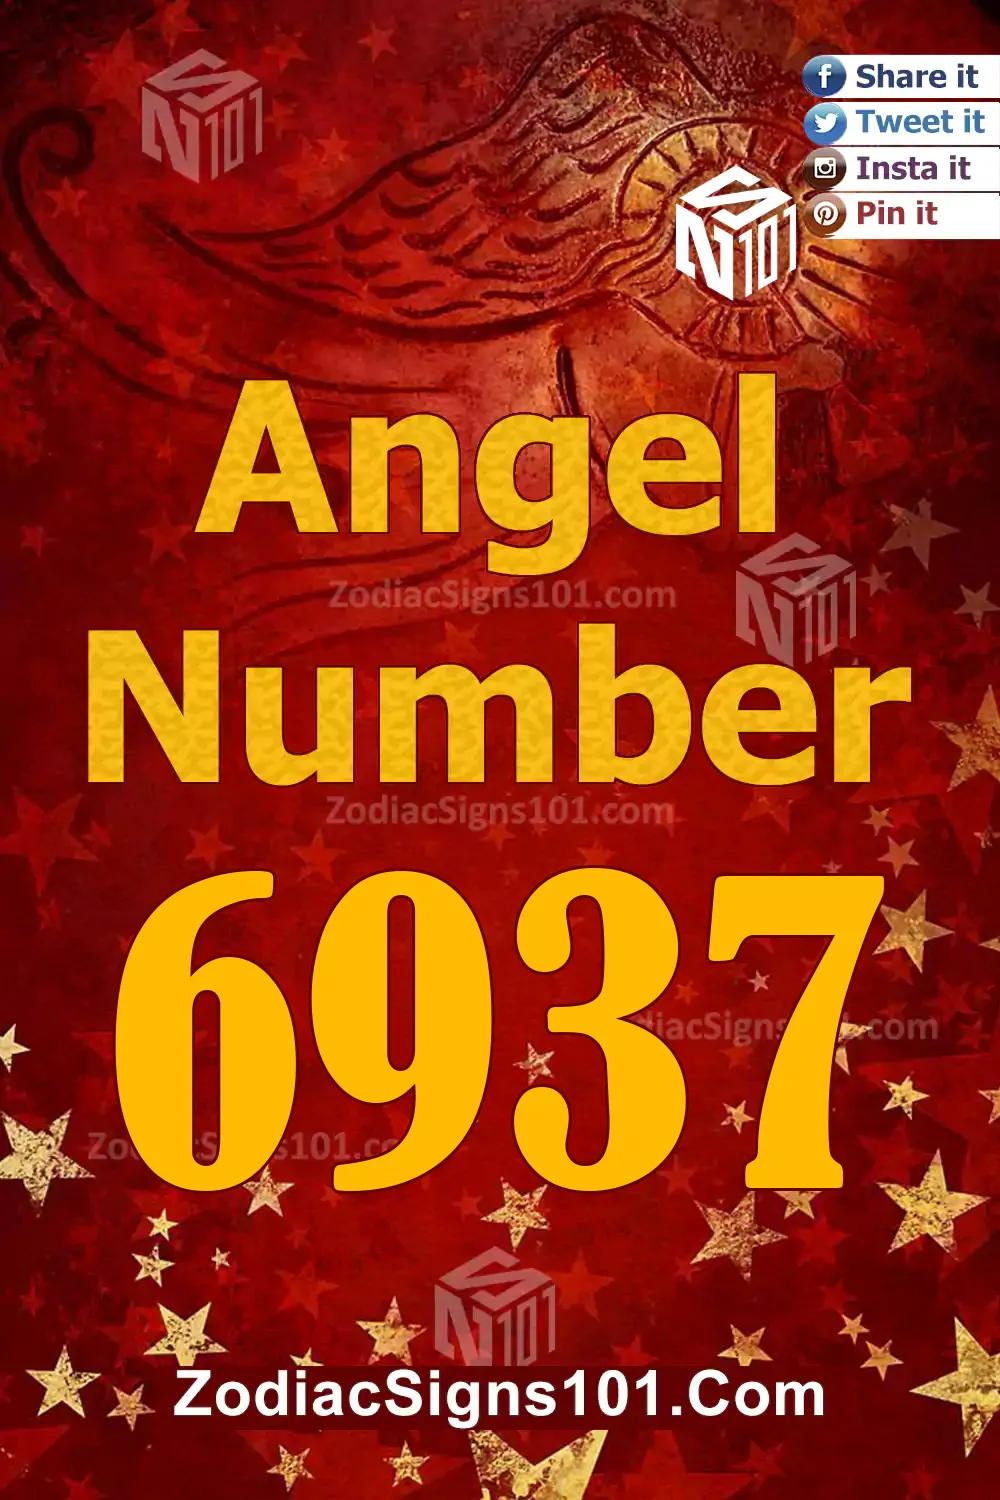 6937 Angel Number Meaning